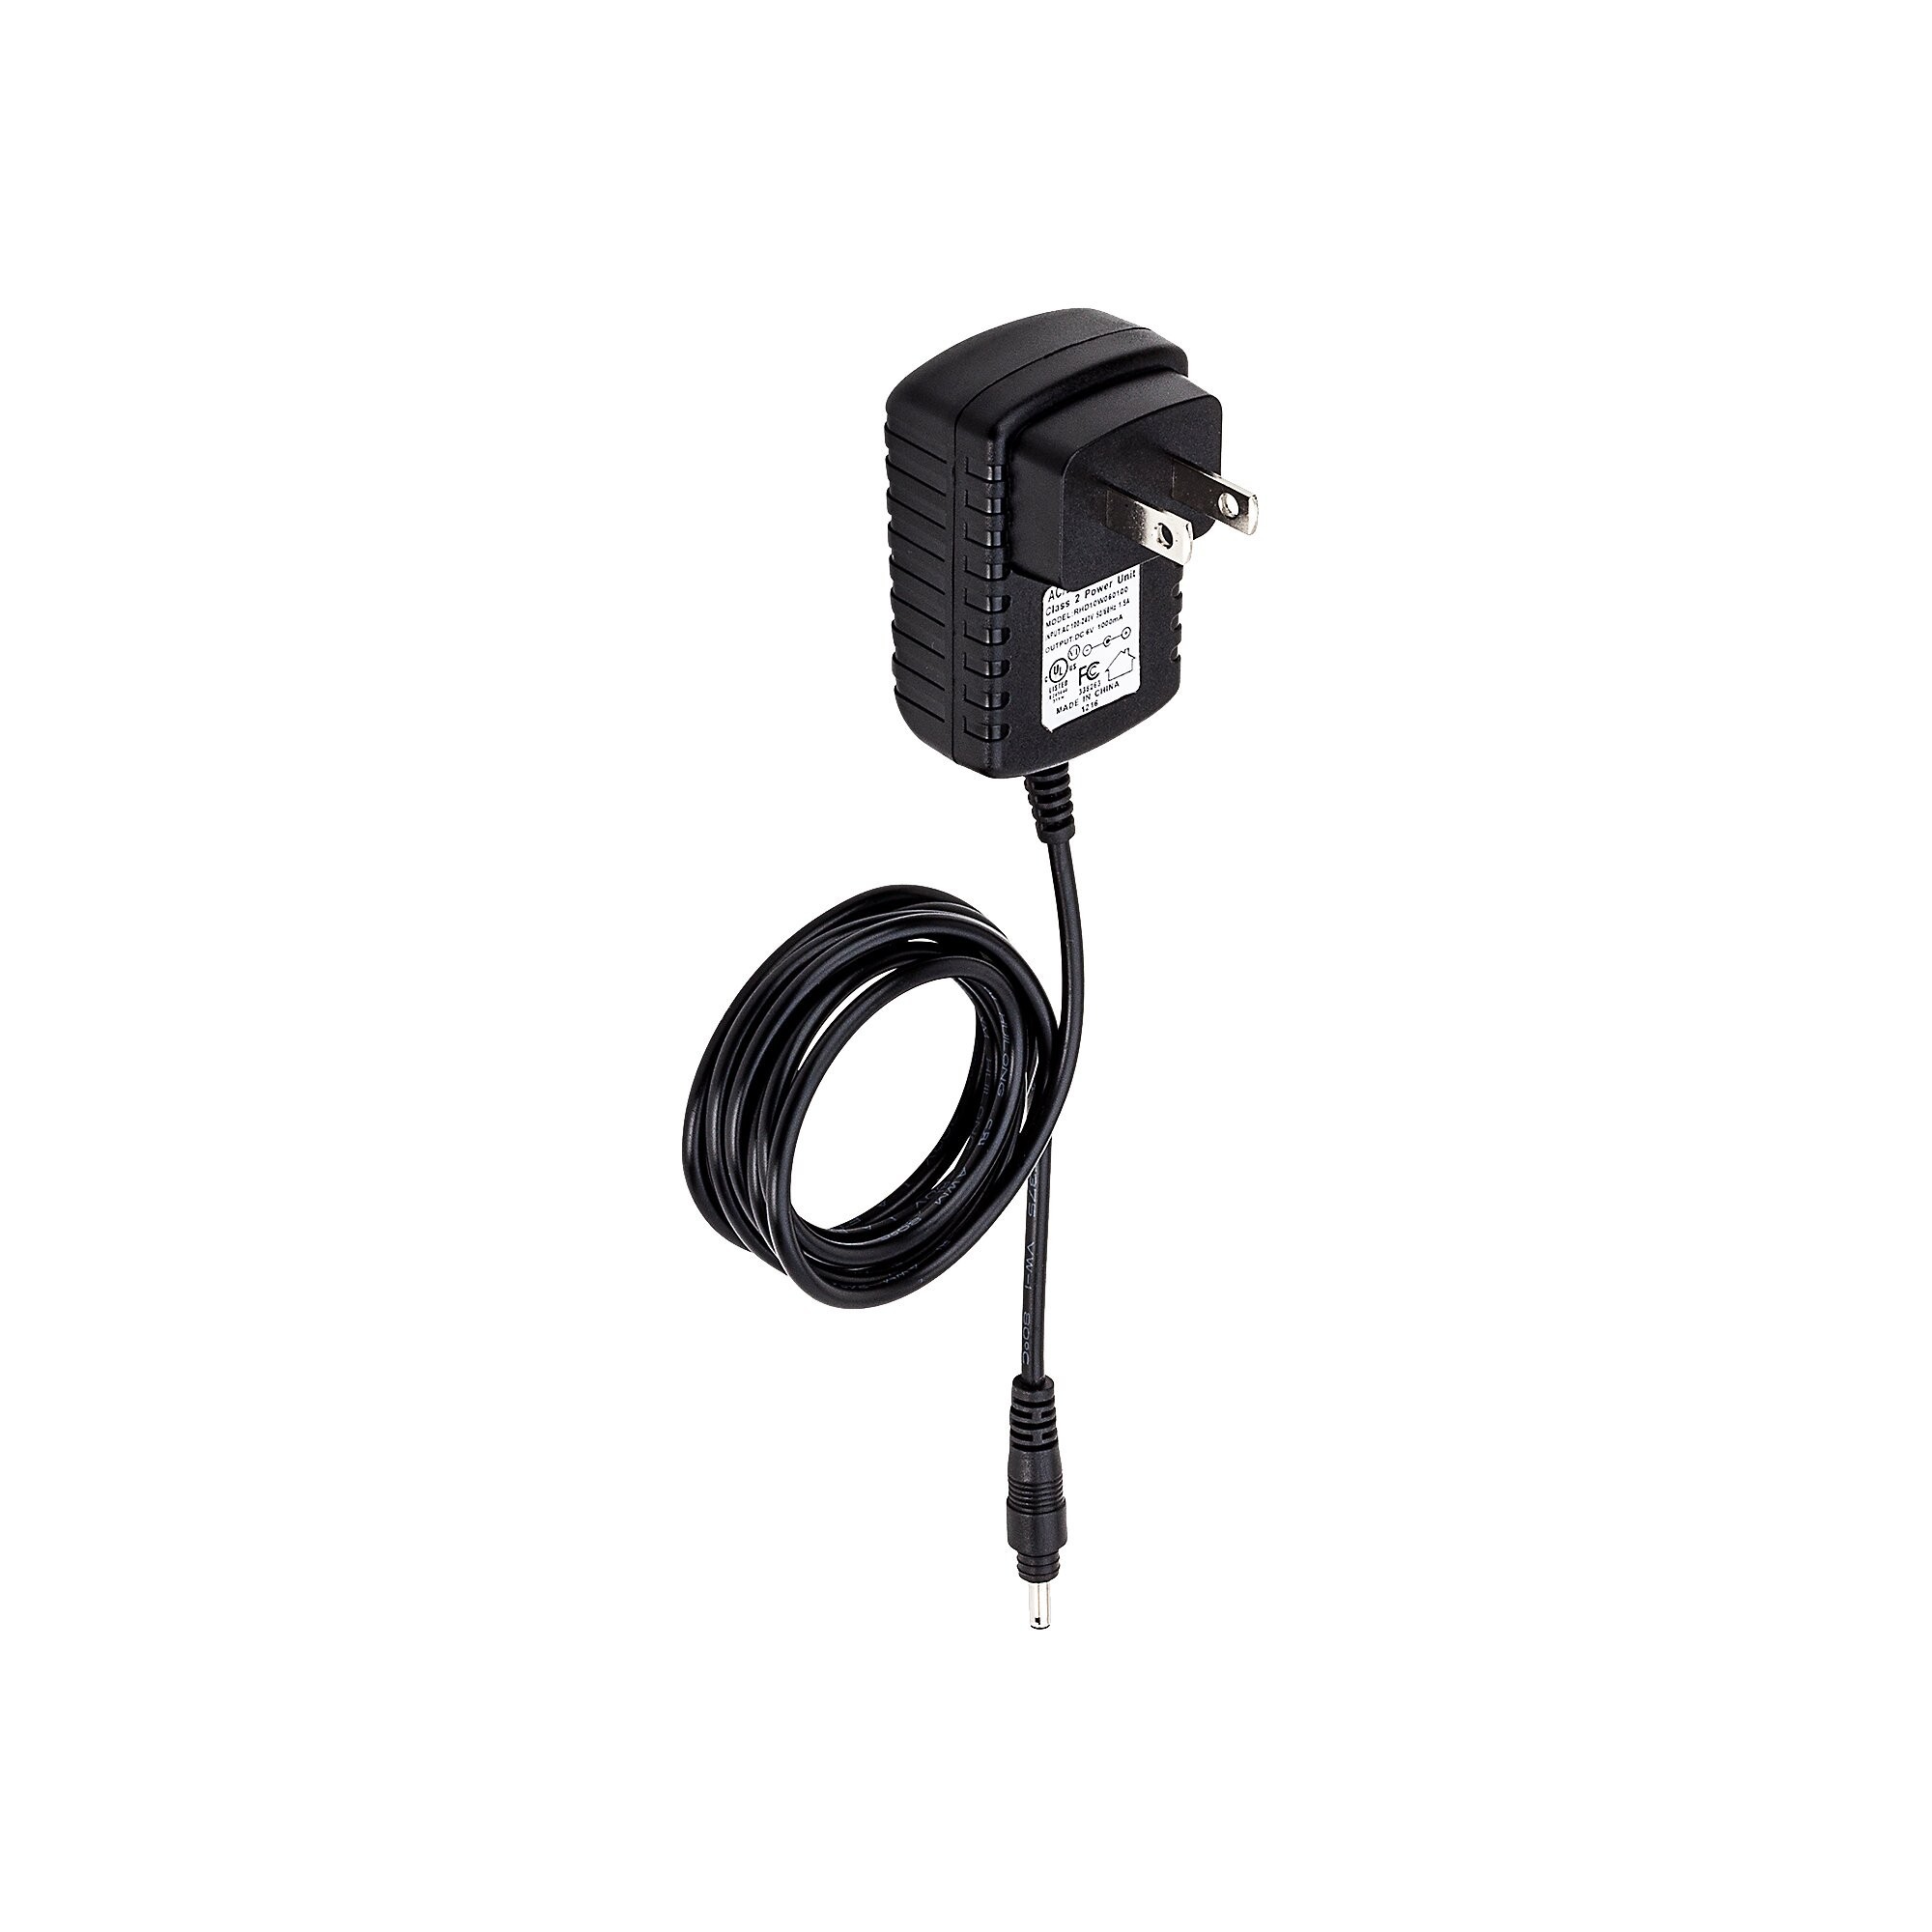 PFISTER 952-0080 REACT A/C POWER ADAPTER FOR F-529-ERYGS AND LG529-ESAC